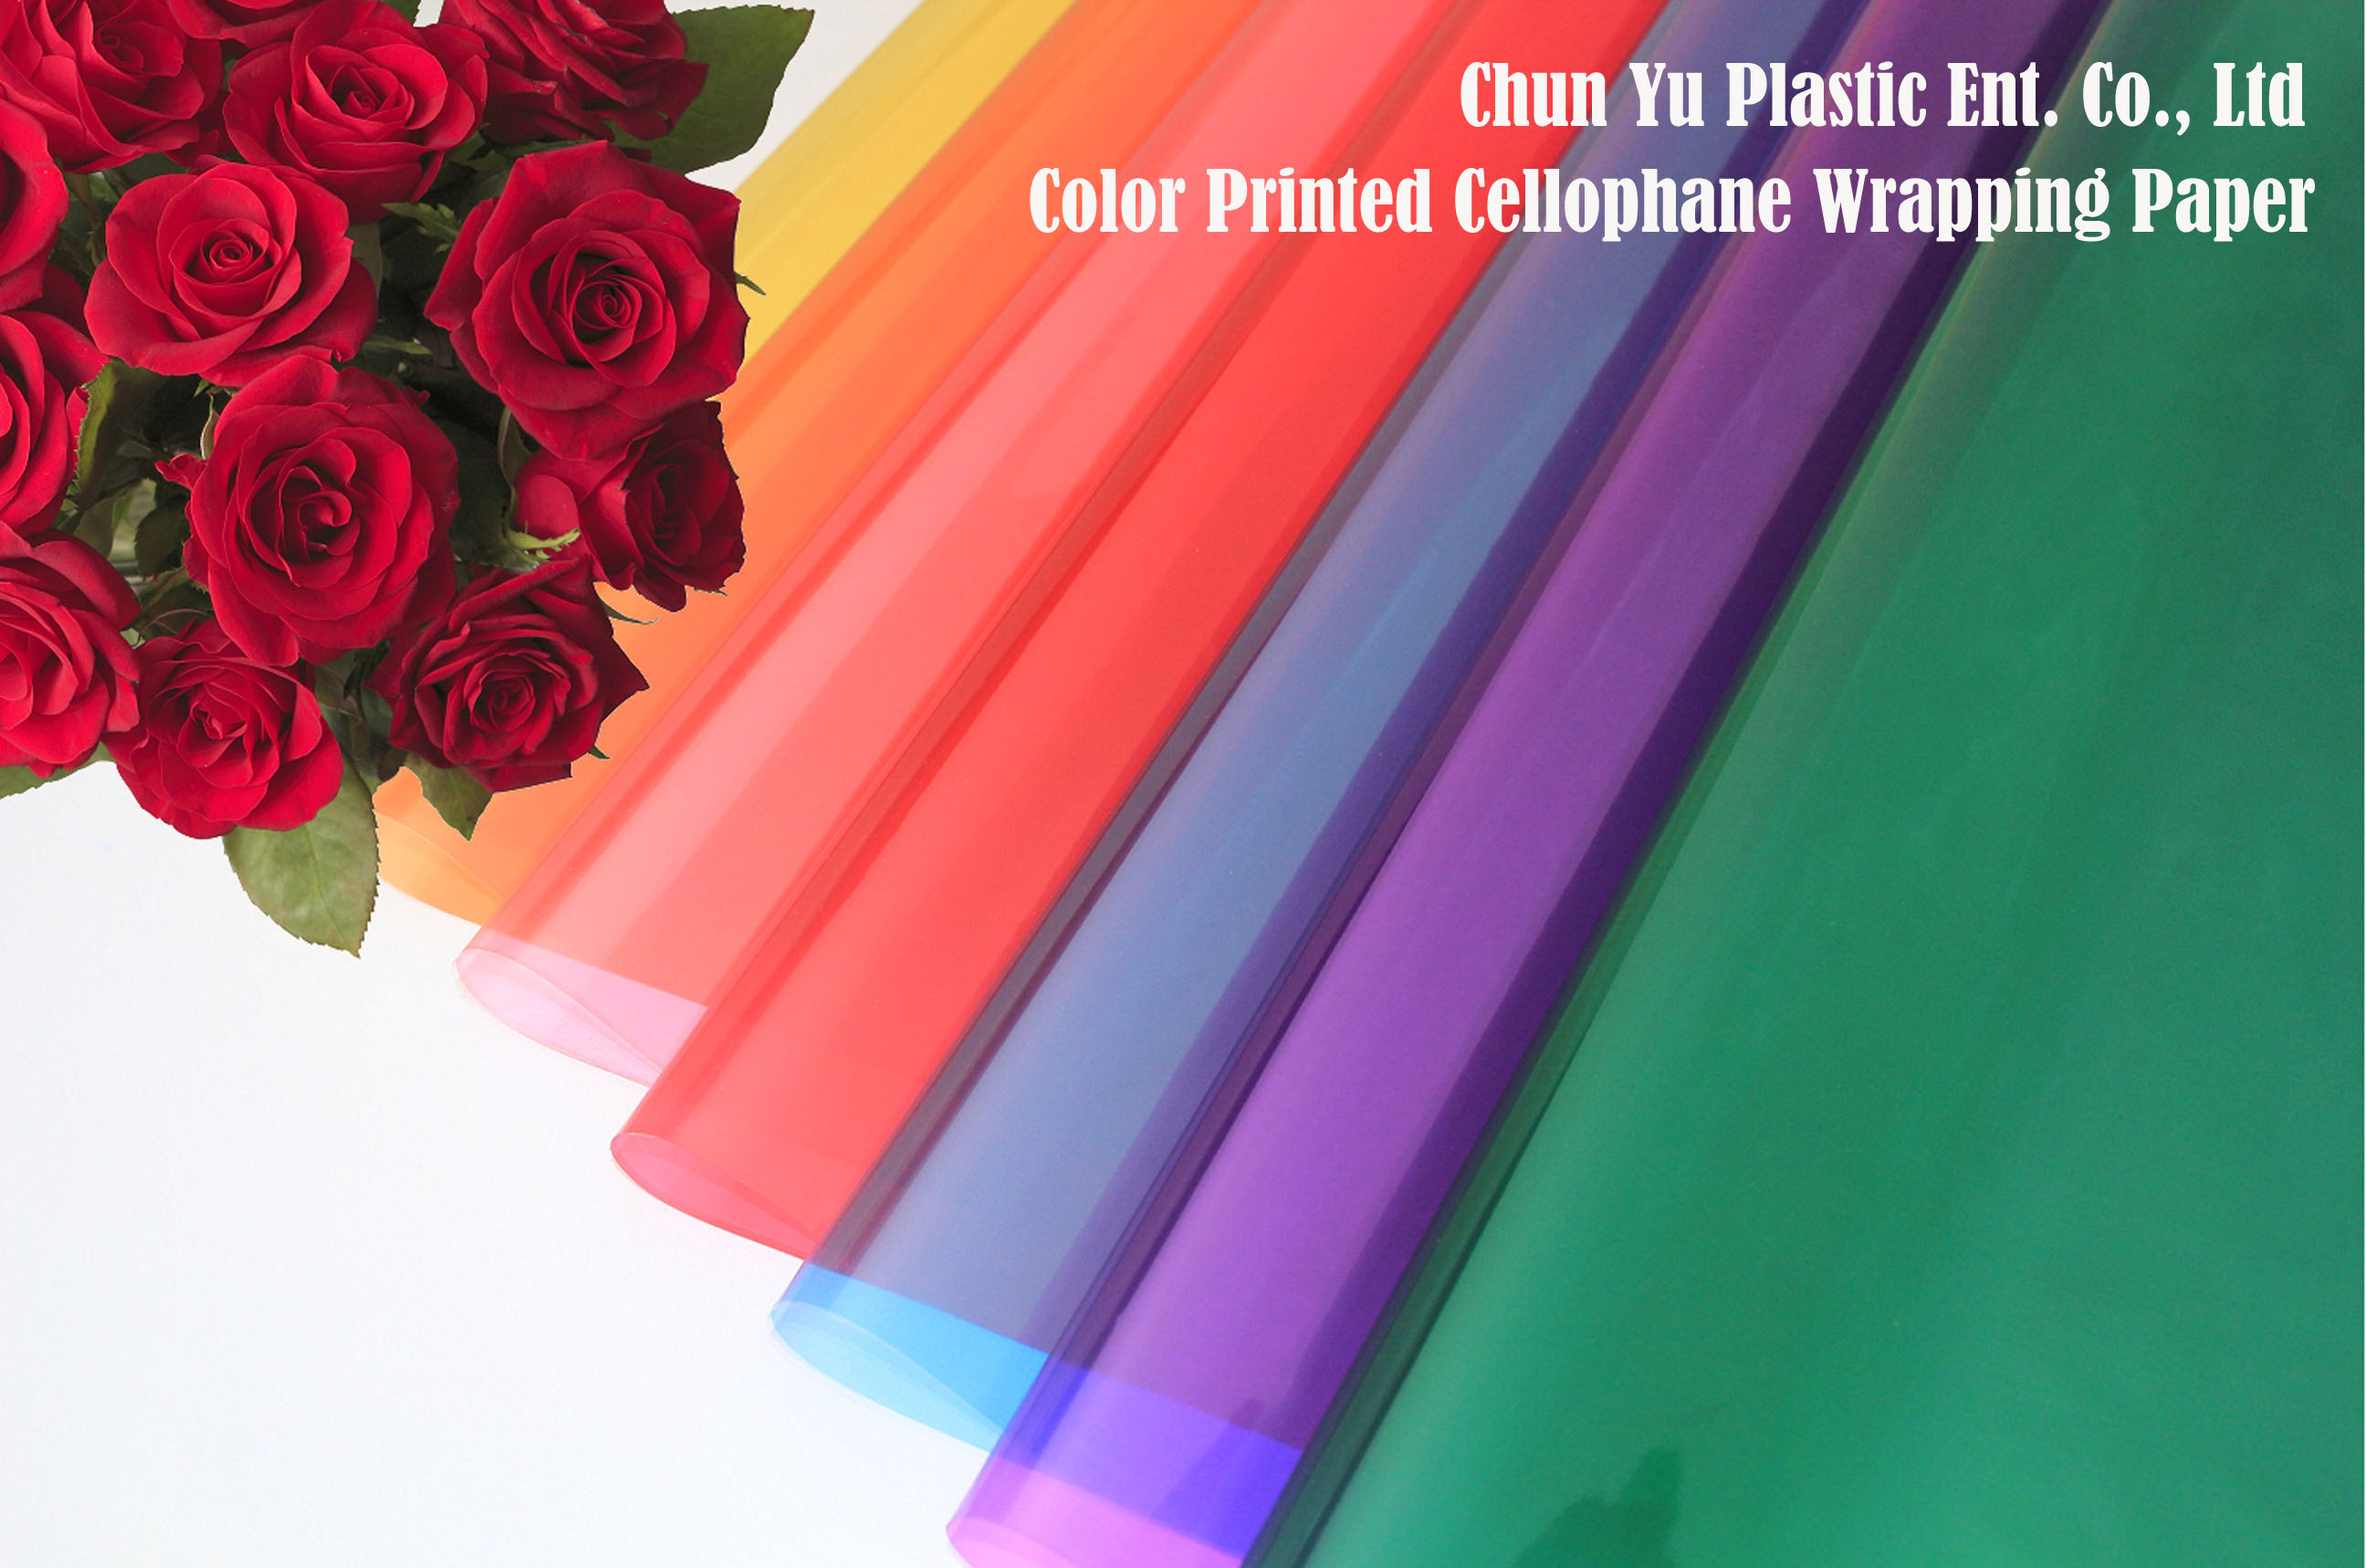 Cut flower bouquet wrapped in translucent color printed clear cellophane wrapping paper